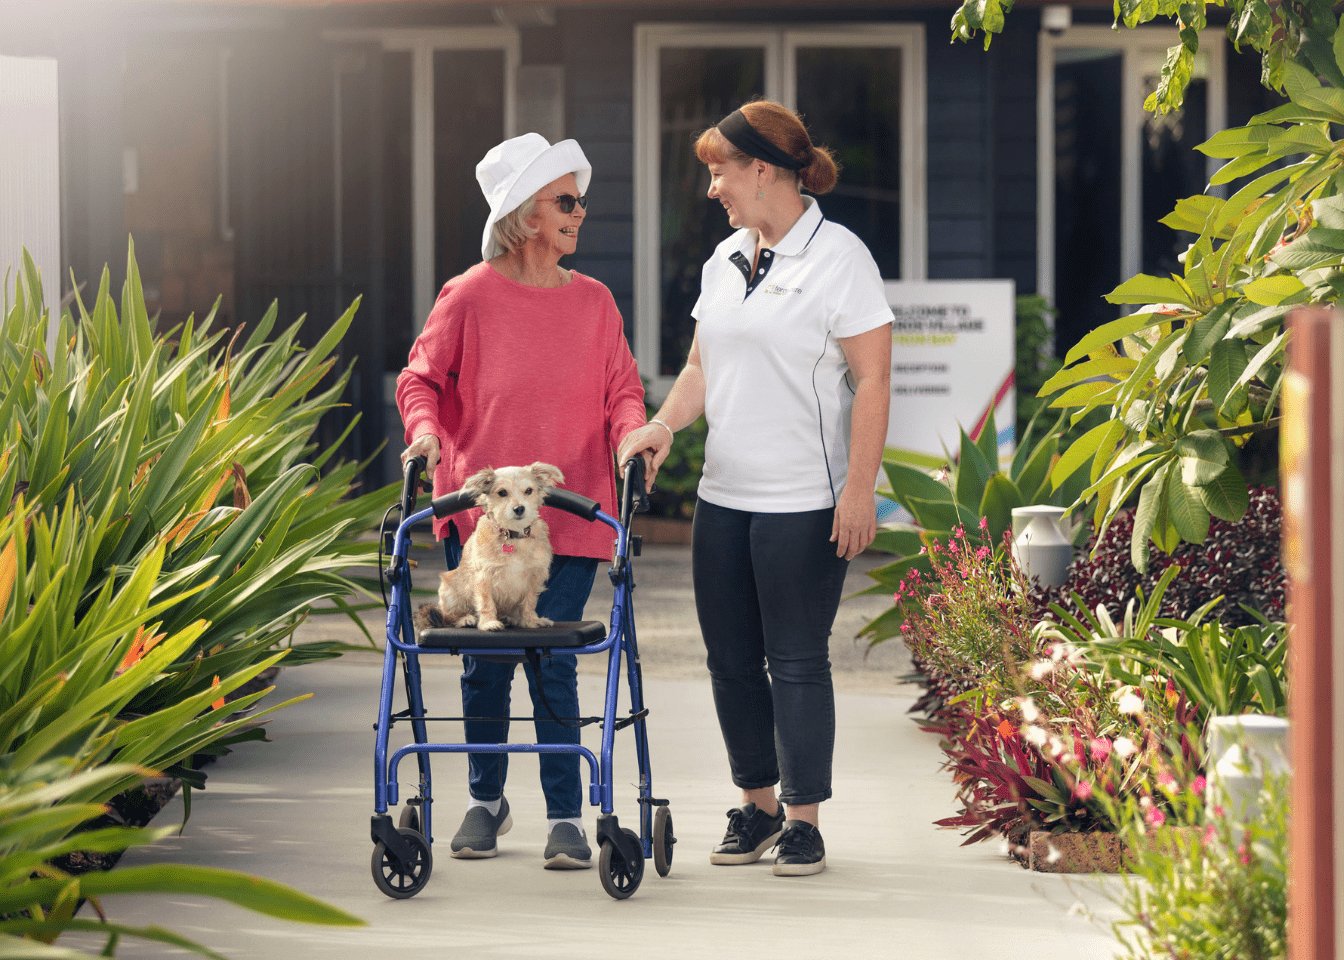 Pet therapy at Feros Care residential village